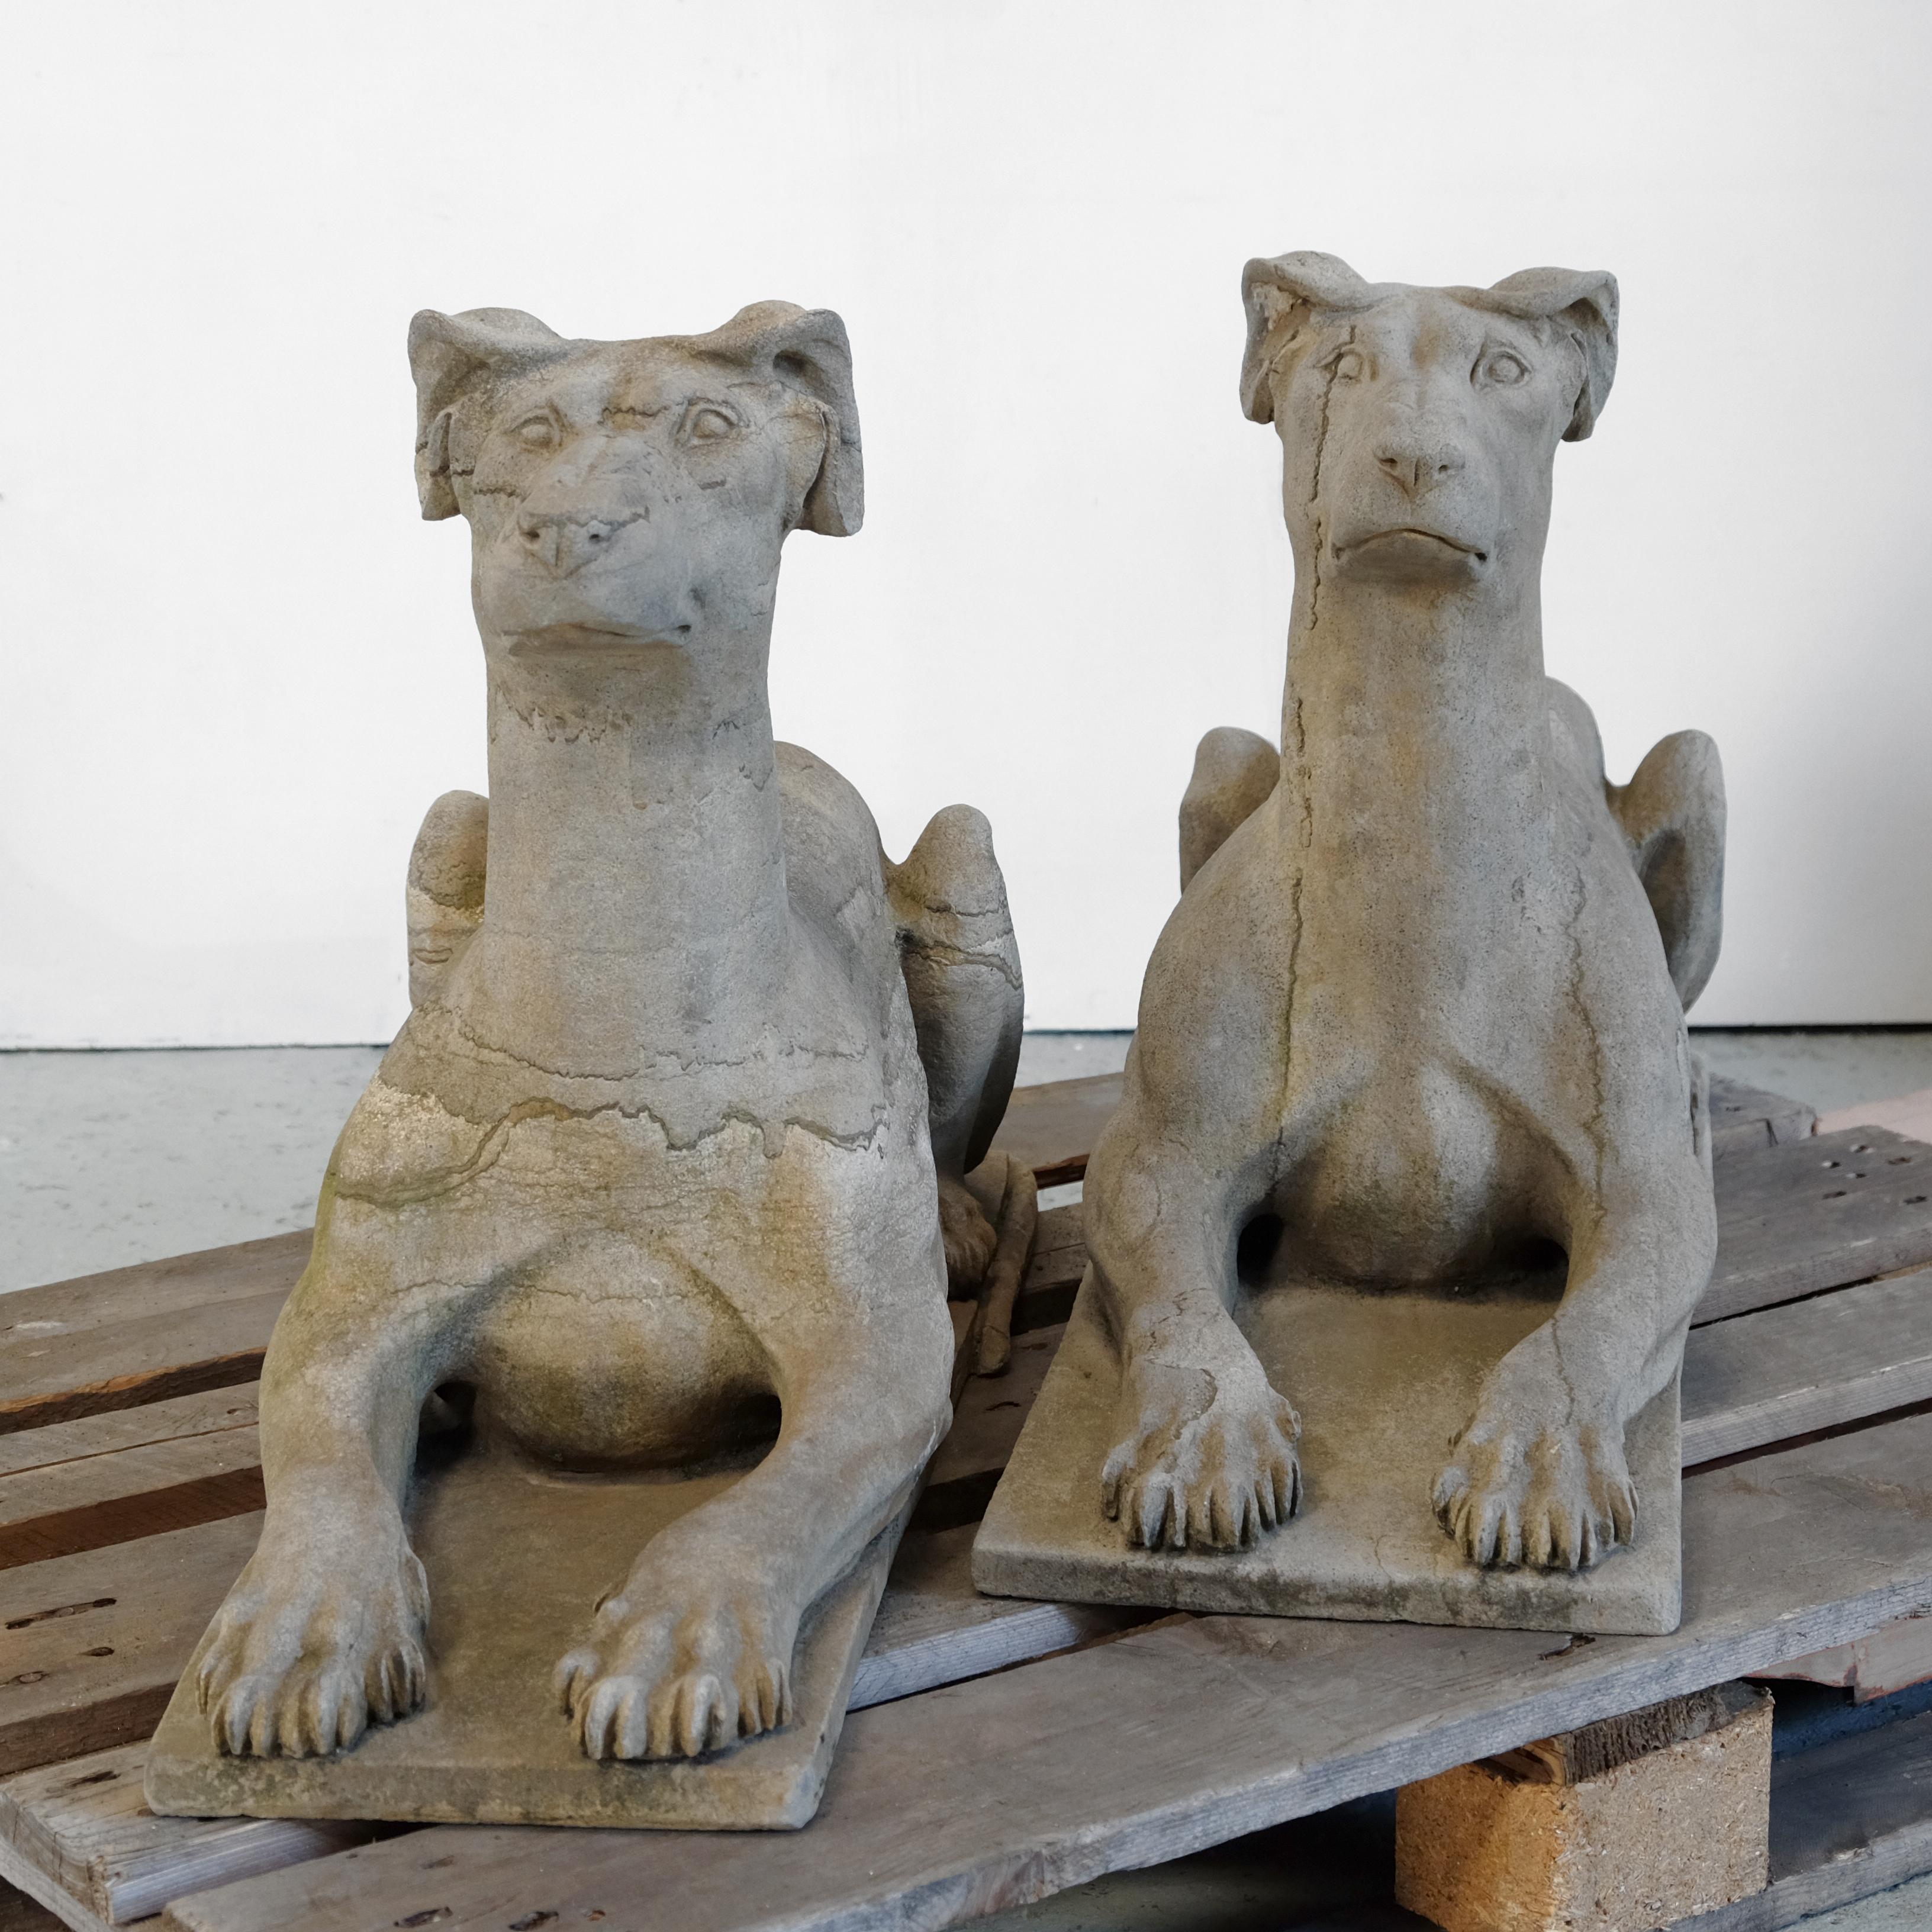 A magnificent pair of hand carved solid stone dog statues which I believe to be in sandstone with its grainy texture and wonderful veining throughout. Strong and muscular in appearance, they would look very impressive sitting guard either side of a